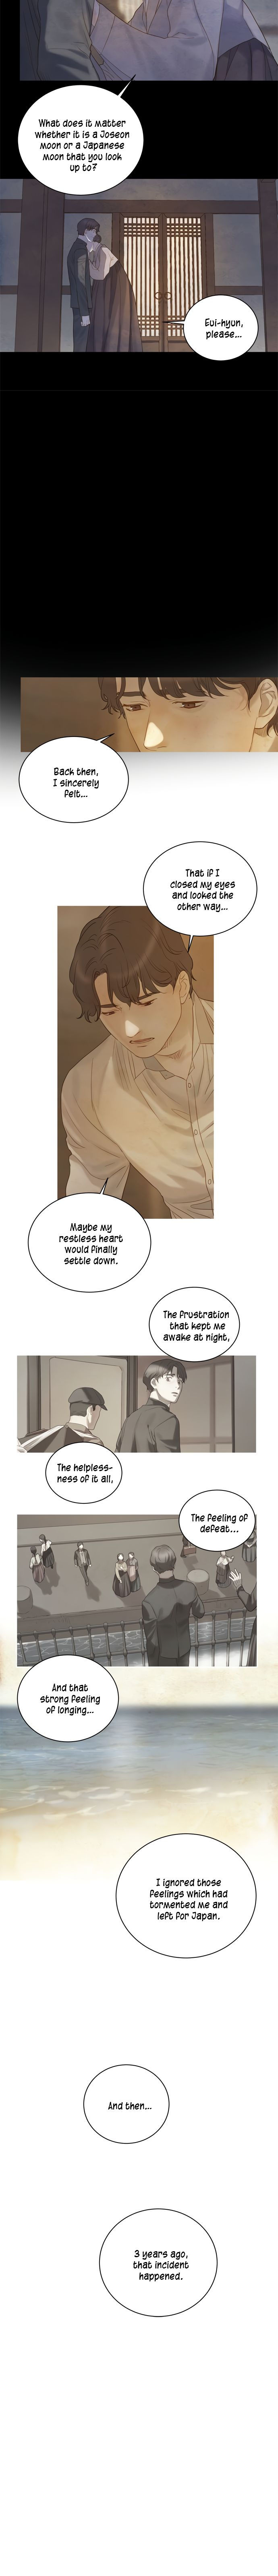 Gorae Byul - The Gyeongseong Mermaid - Chapter 21 Page 16